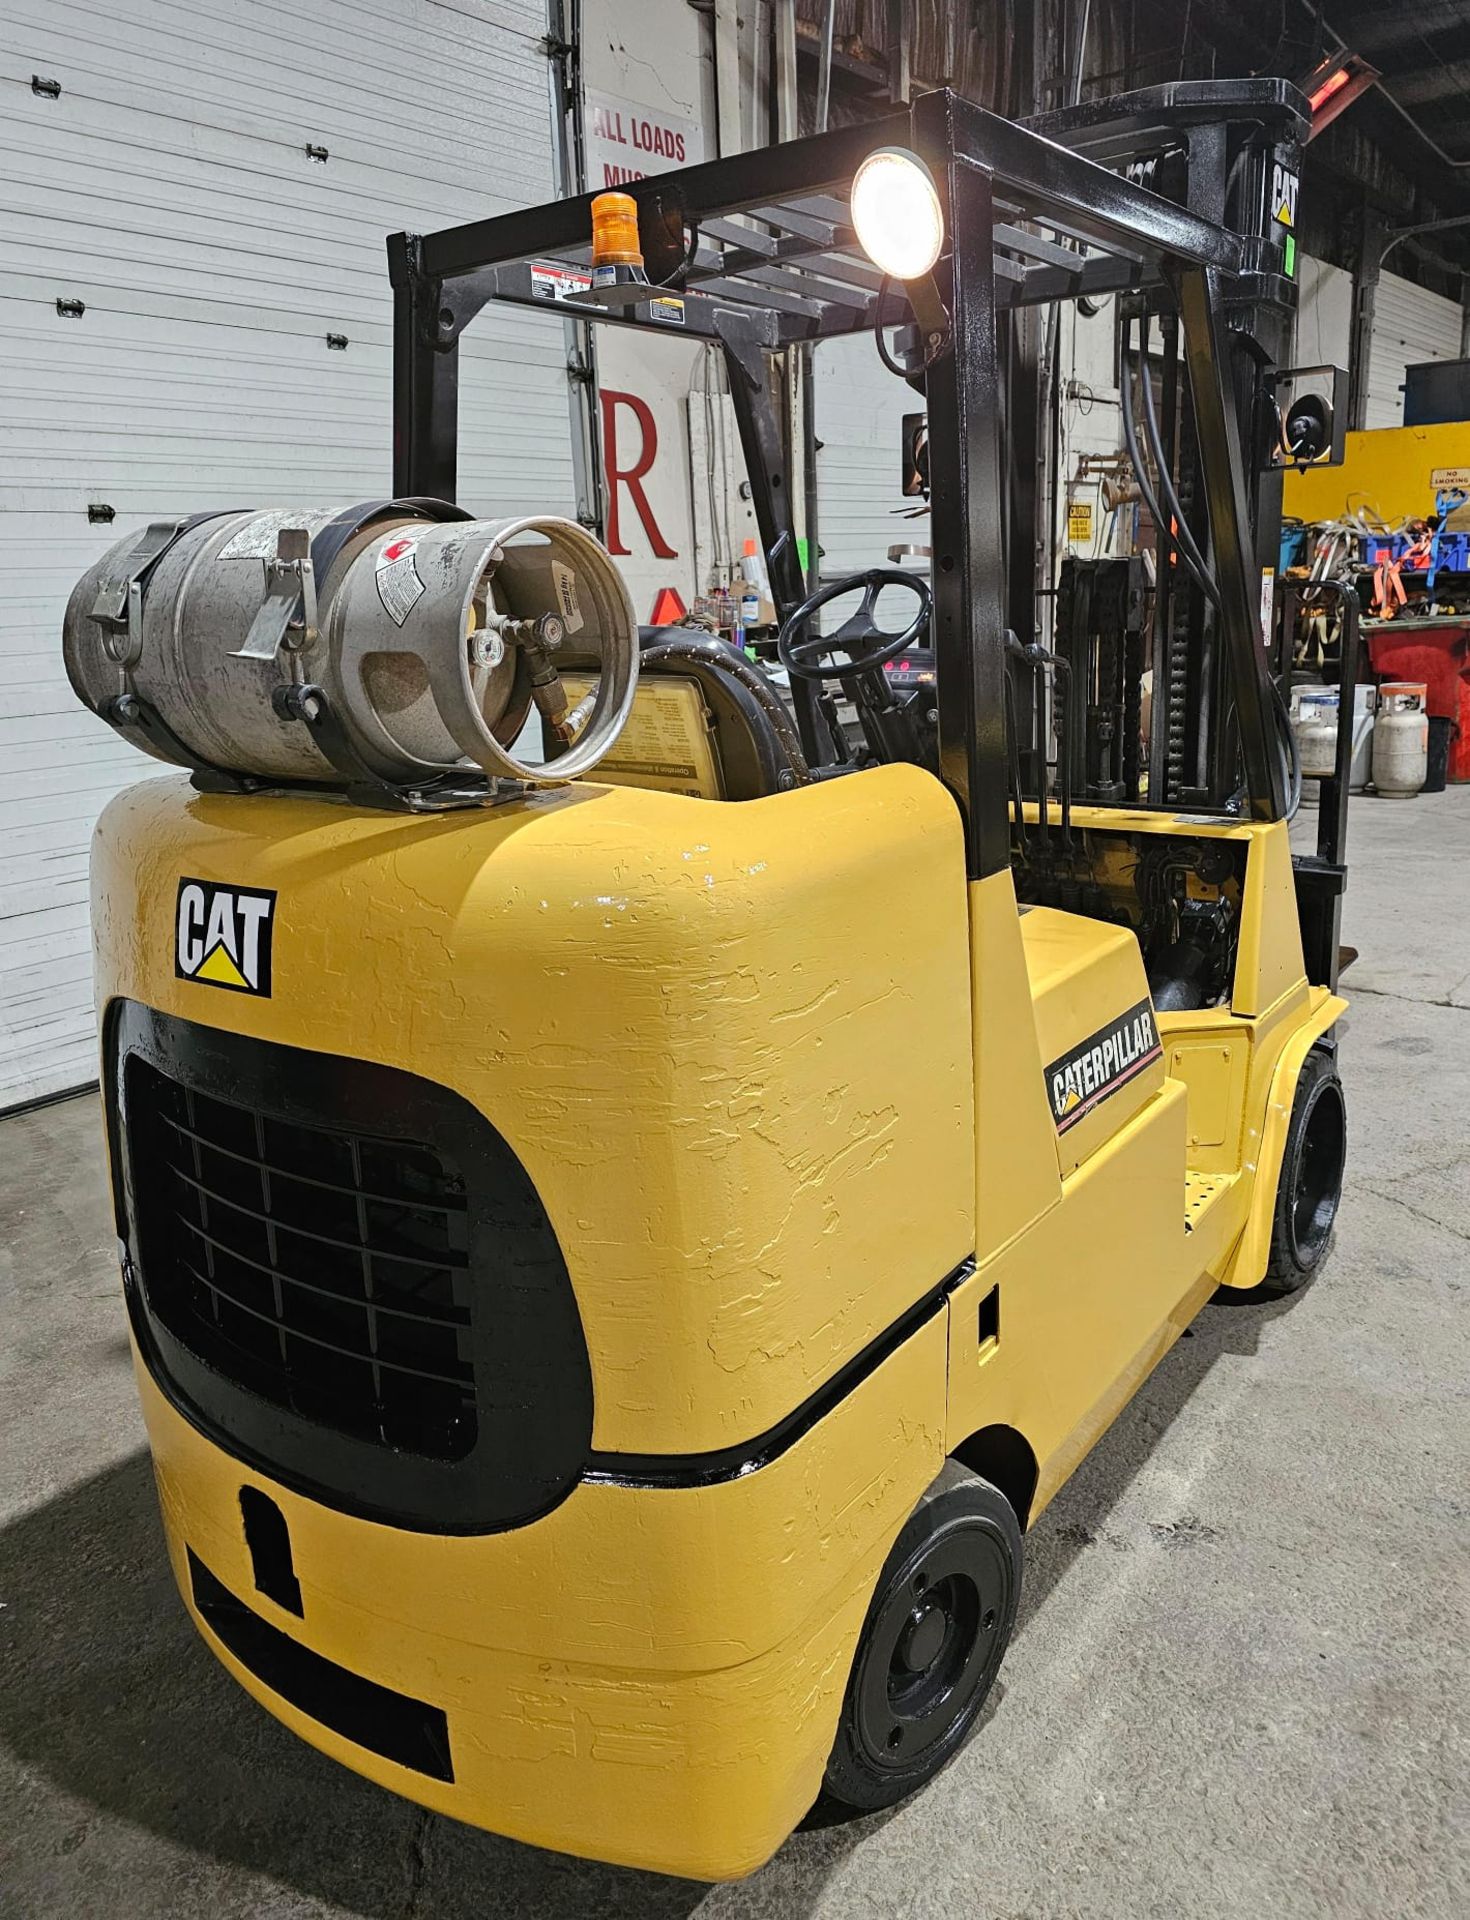 CAT 9,000lbs Capacity LPG (Propane) Forklift with sideshift & 3-STAGE MAST 209" load height - Image 2 of 5